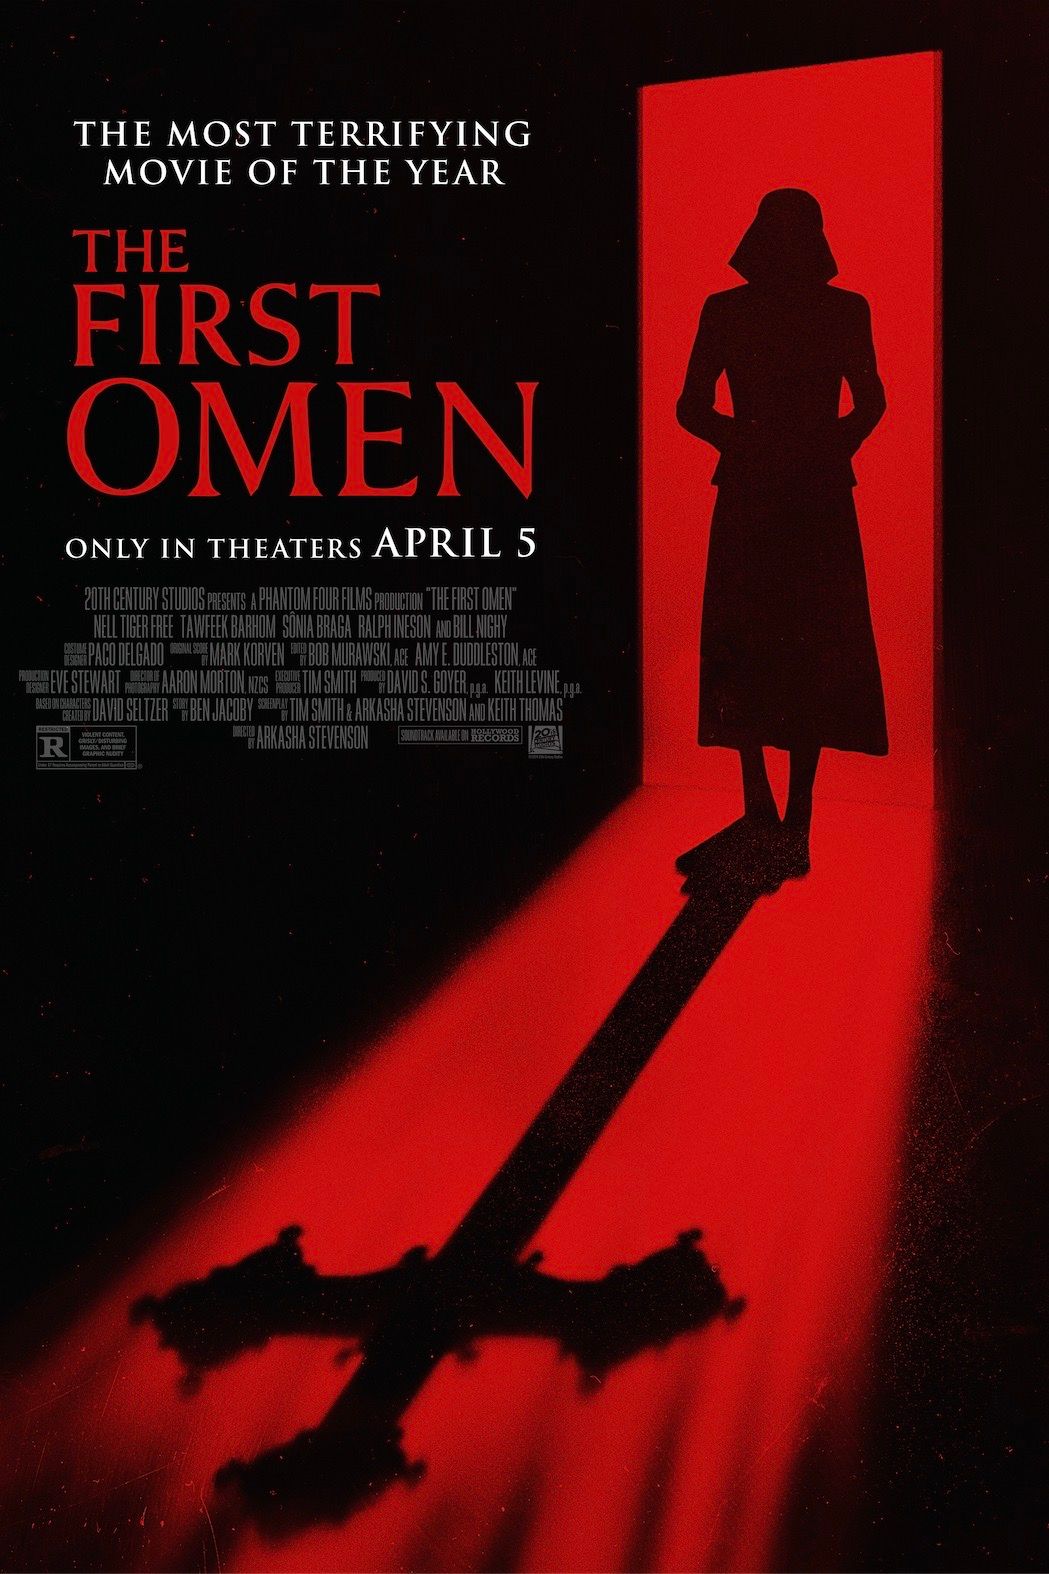 The First Omen Clip Sees Sister Anjelica Up To No Good In New Horror